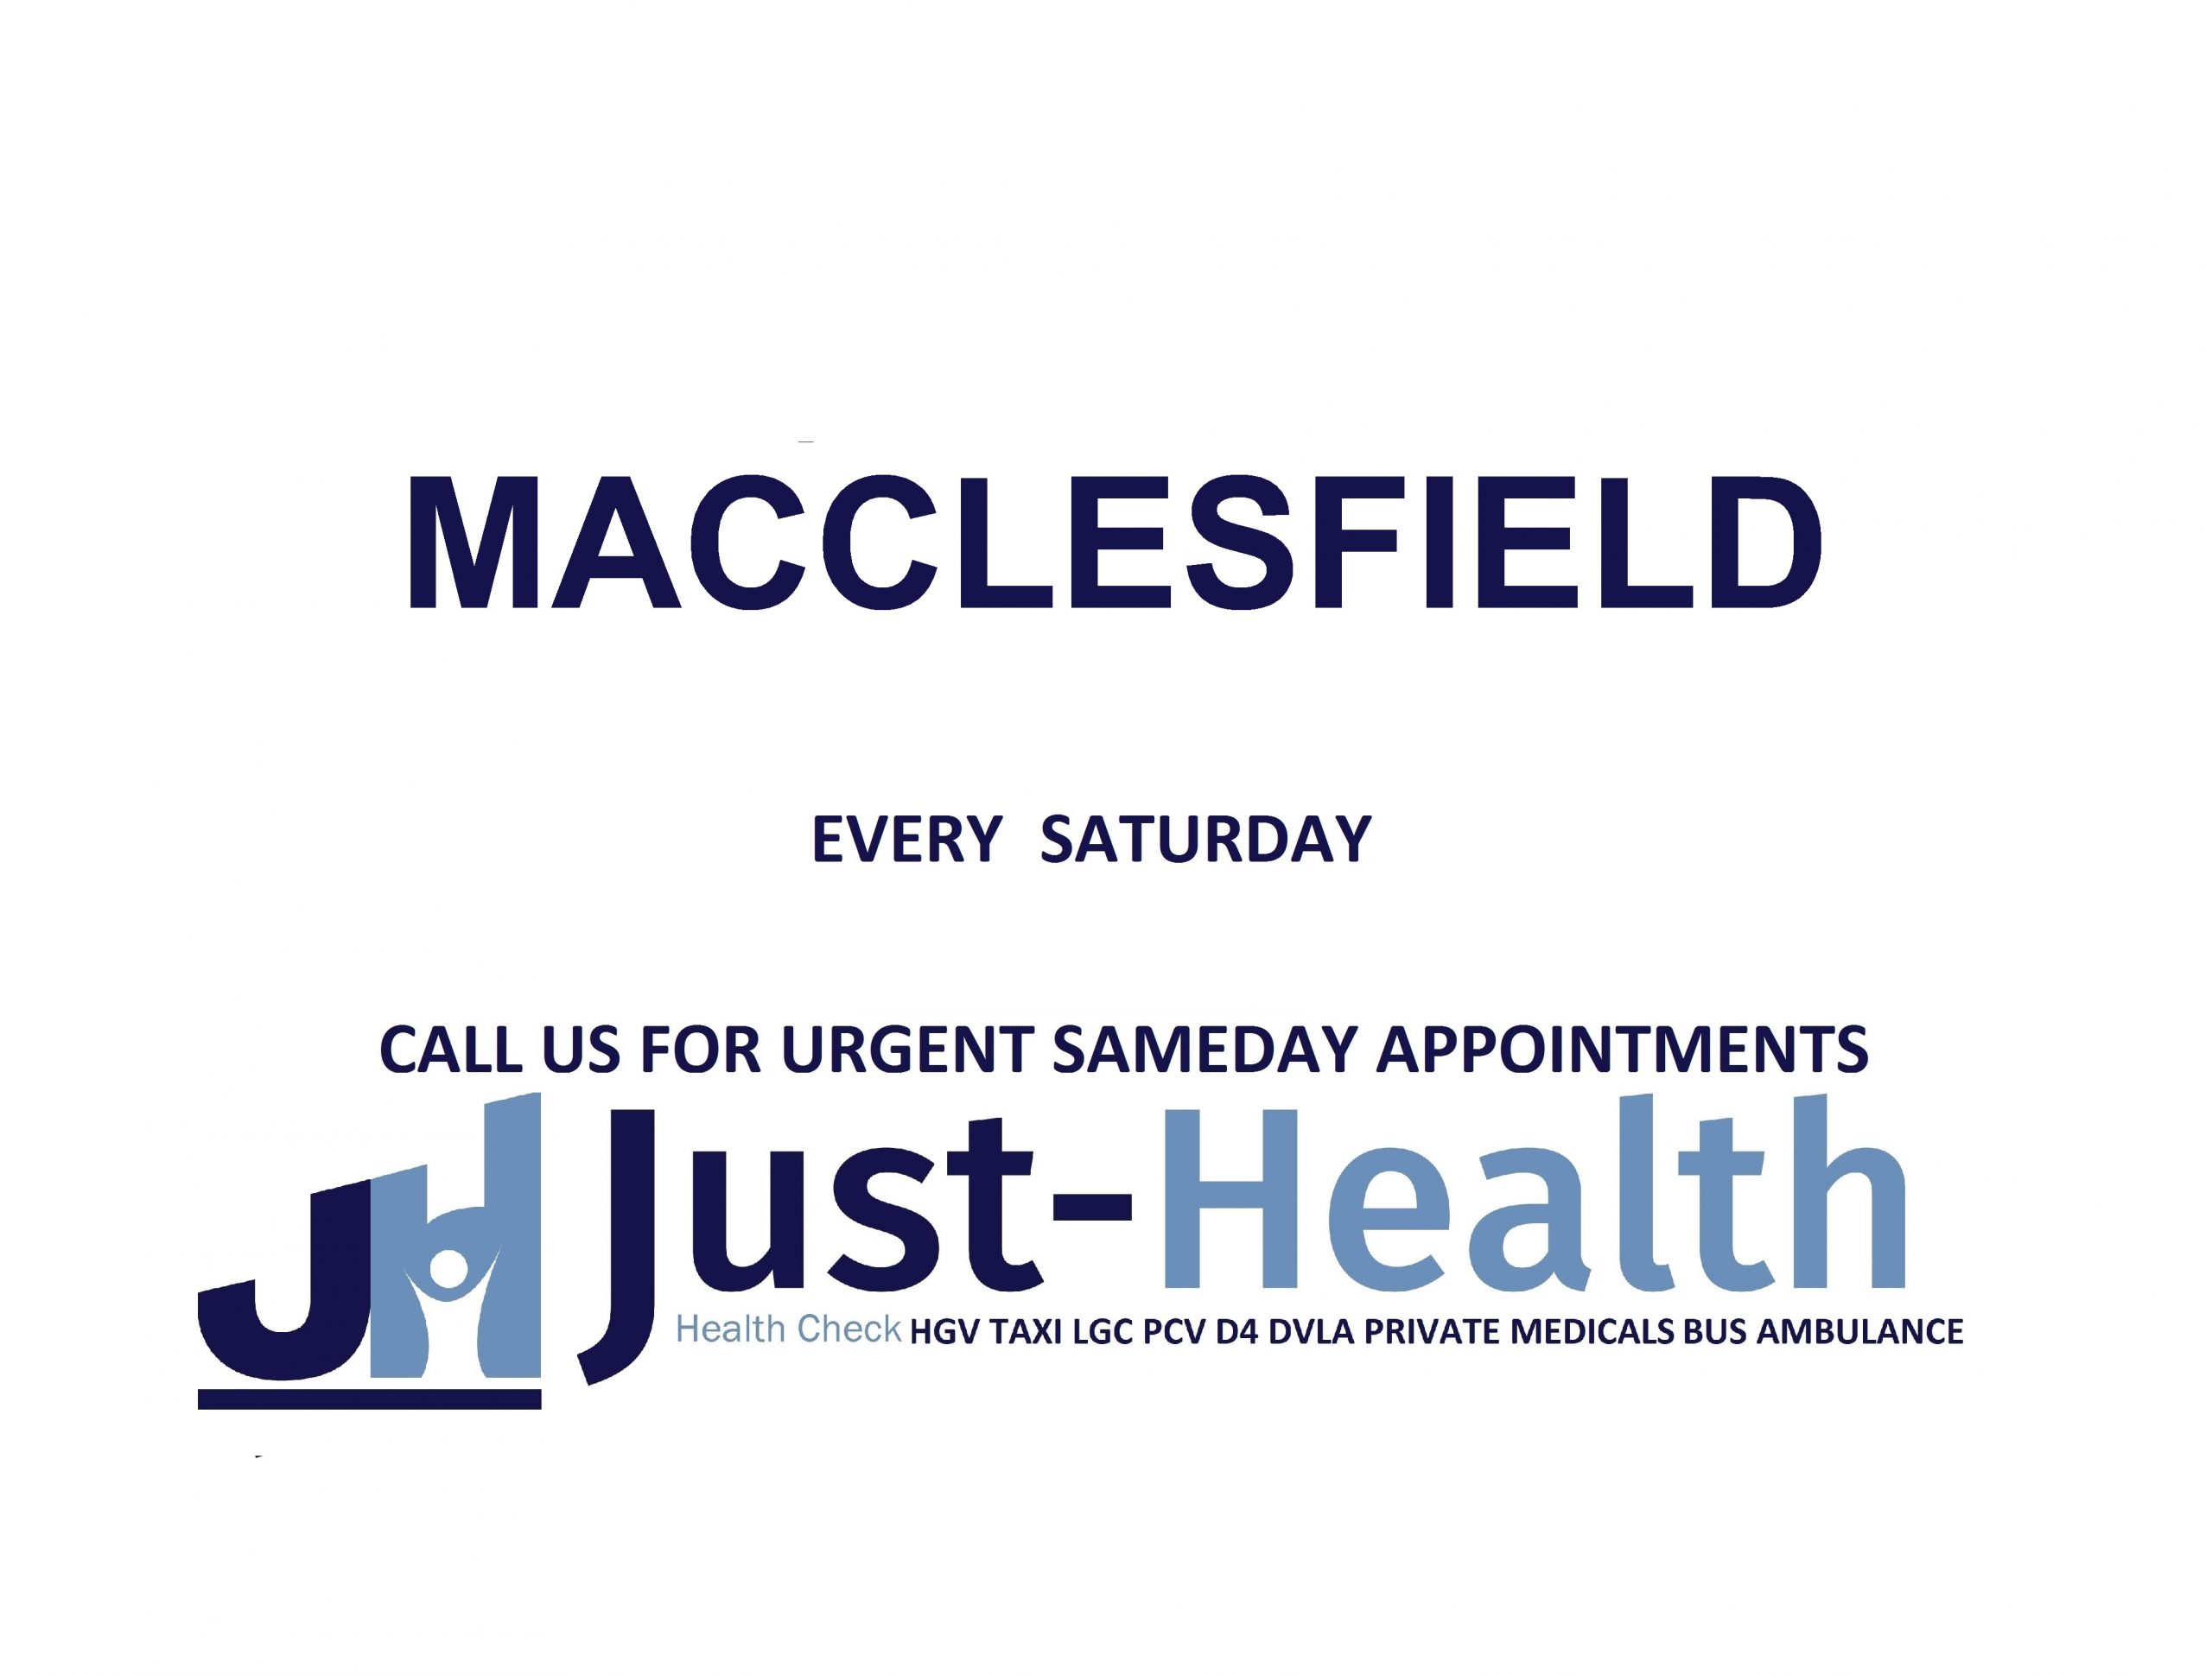 Just Health C1 Medical Driver Medicals & Private Gp services